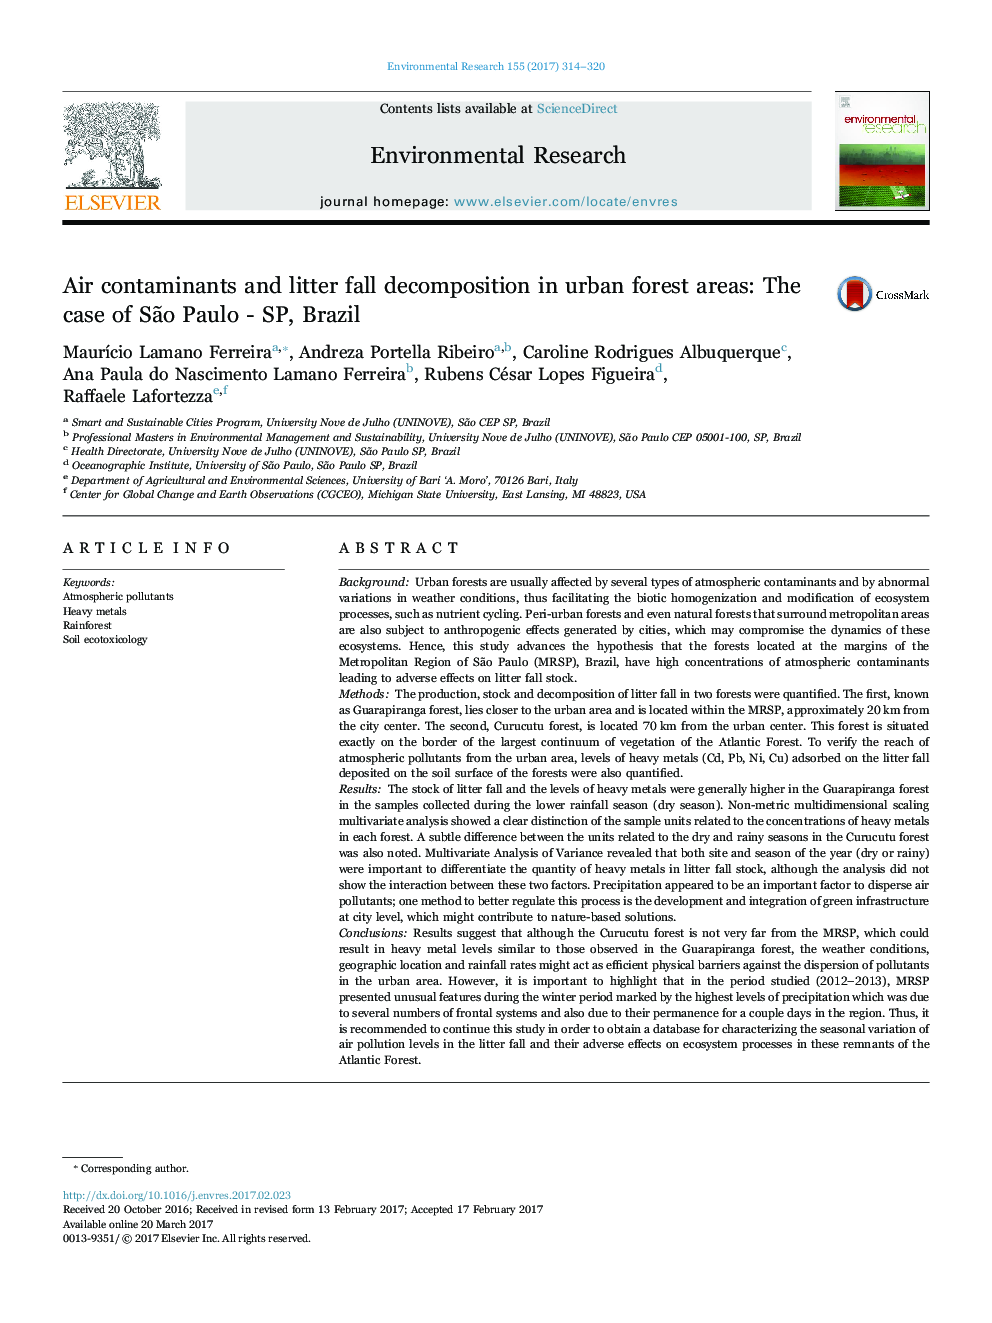 Air contaminants and litter fall decomposition in urban forest areas: The case of SÃ£o Paulo - SP, Brazil